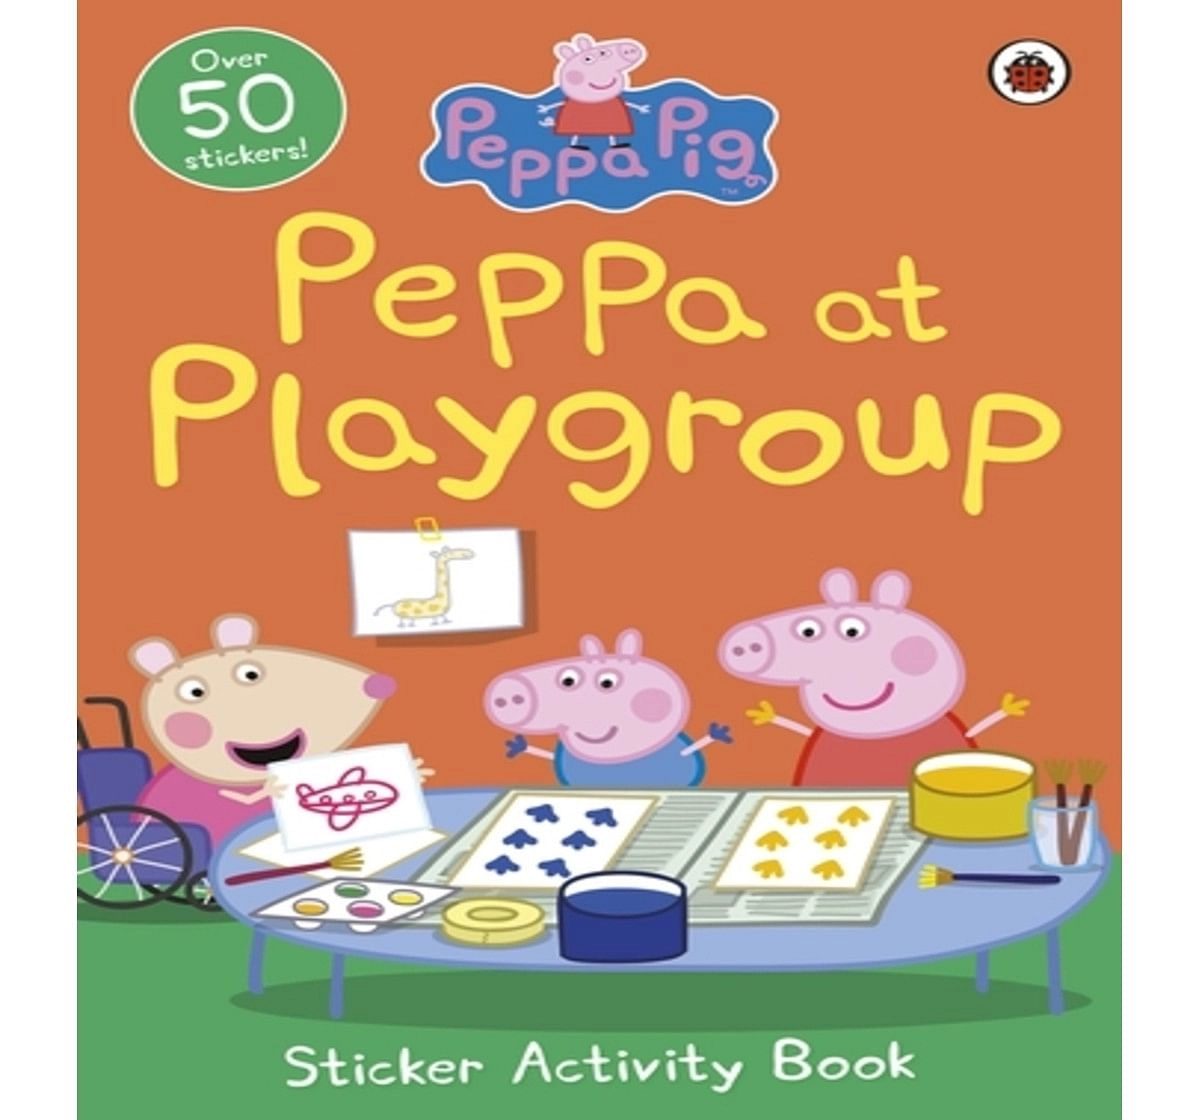 Peppa Pig: Peppa at Playgroup Sticker Ac, 16 Pages Book by Ladybird, Paperback